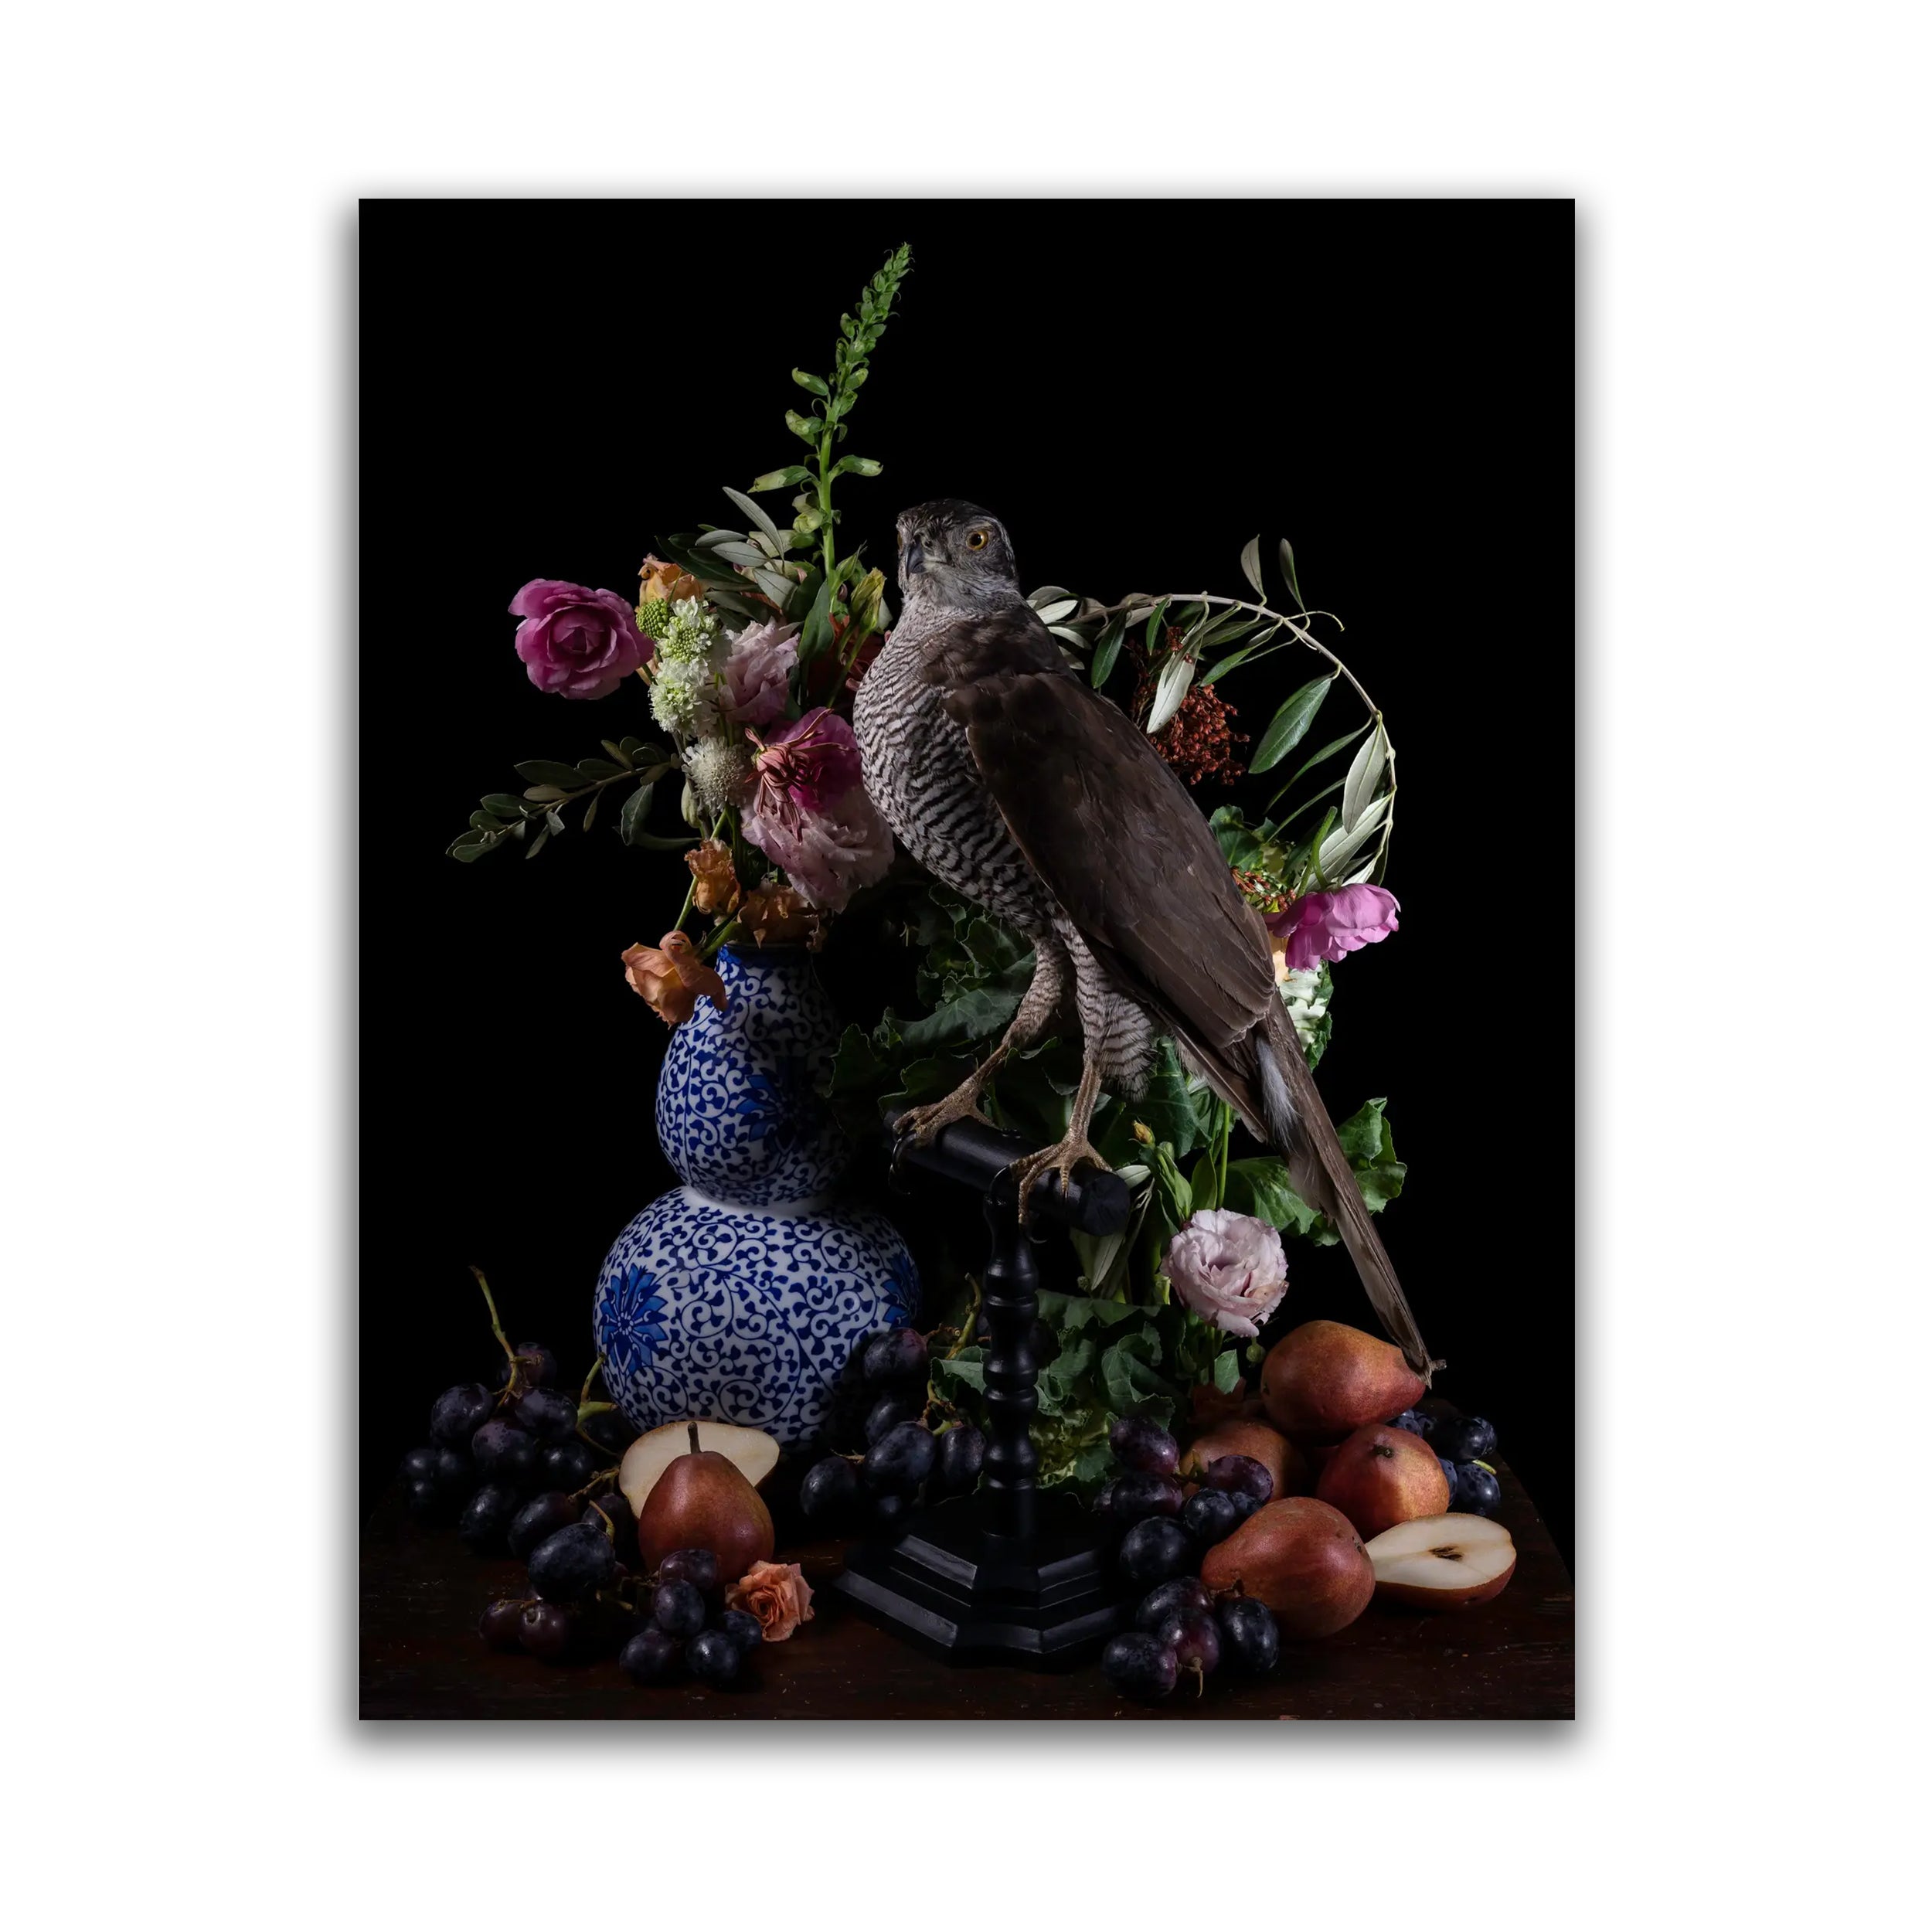 Immortalis Limited edition photograpghy art print - The Blackened Teeth 